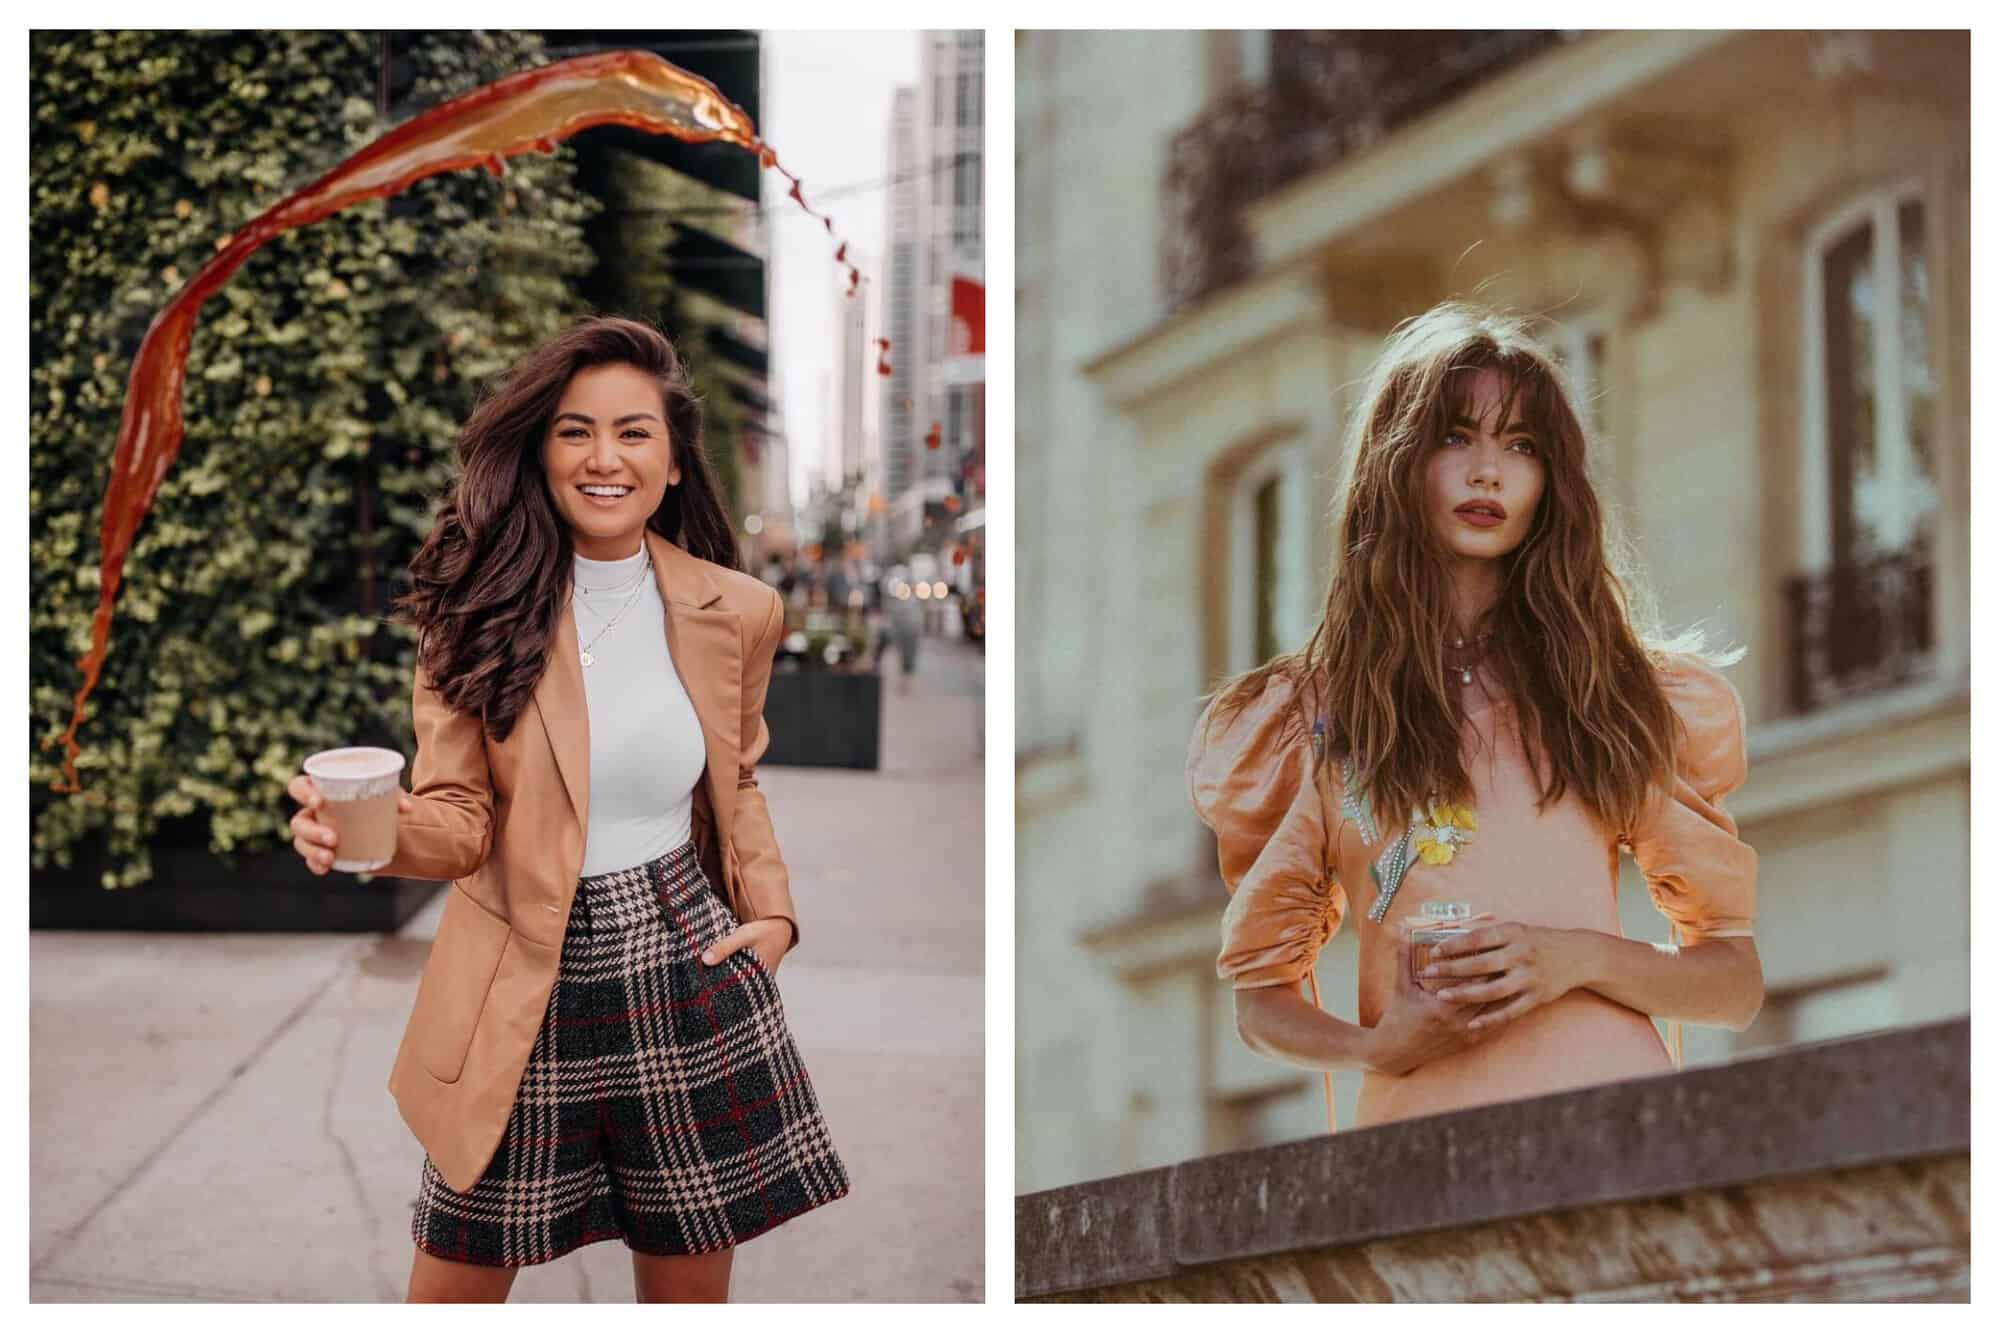 Left: Fashion blogger and influencer Caila Quinn is seen throwing her coffee and the shot was taken while the coffee was mid-air. She is holding the cup on her right hand and is wearing a white top, checkered skirt and a beige leather blazer. She has a beautiful smile and her brown, perfectly curled hair is captured. Right: Fashion blogger Mara Lafontan is photographed in a peach colored dress with mutton sleeves. She appears to be holding a cup or a drink. She is gazing nonchalantly. Her messy golden brown hair is styled looking 'undone' or 'messy' with beach waves.